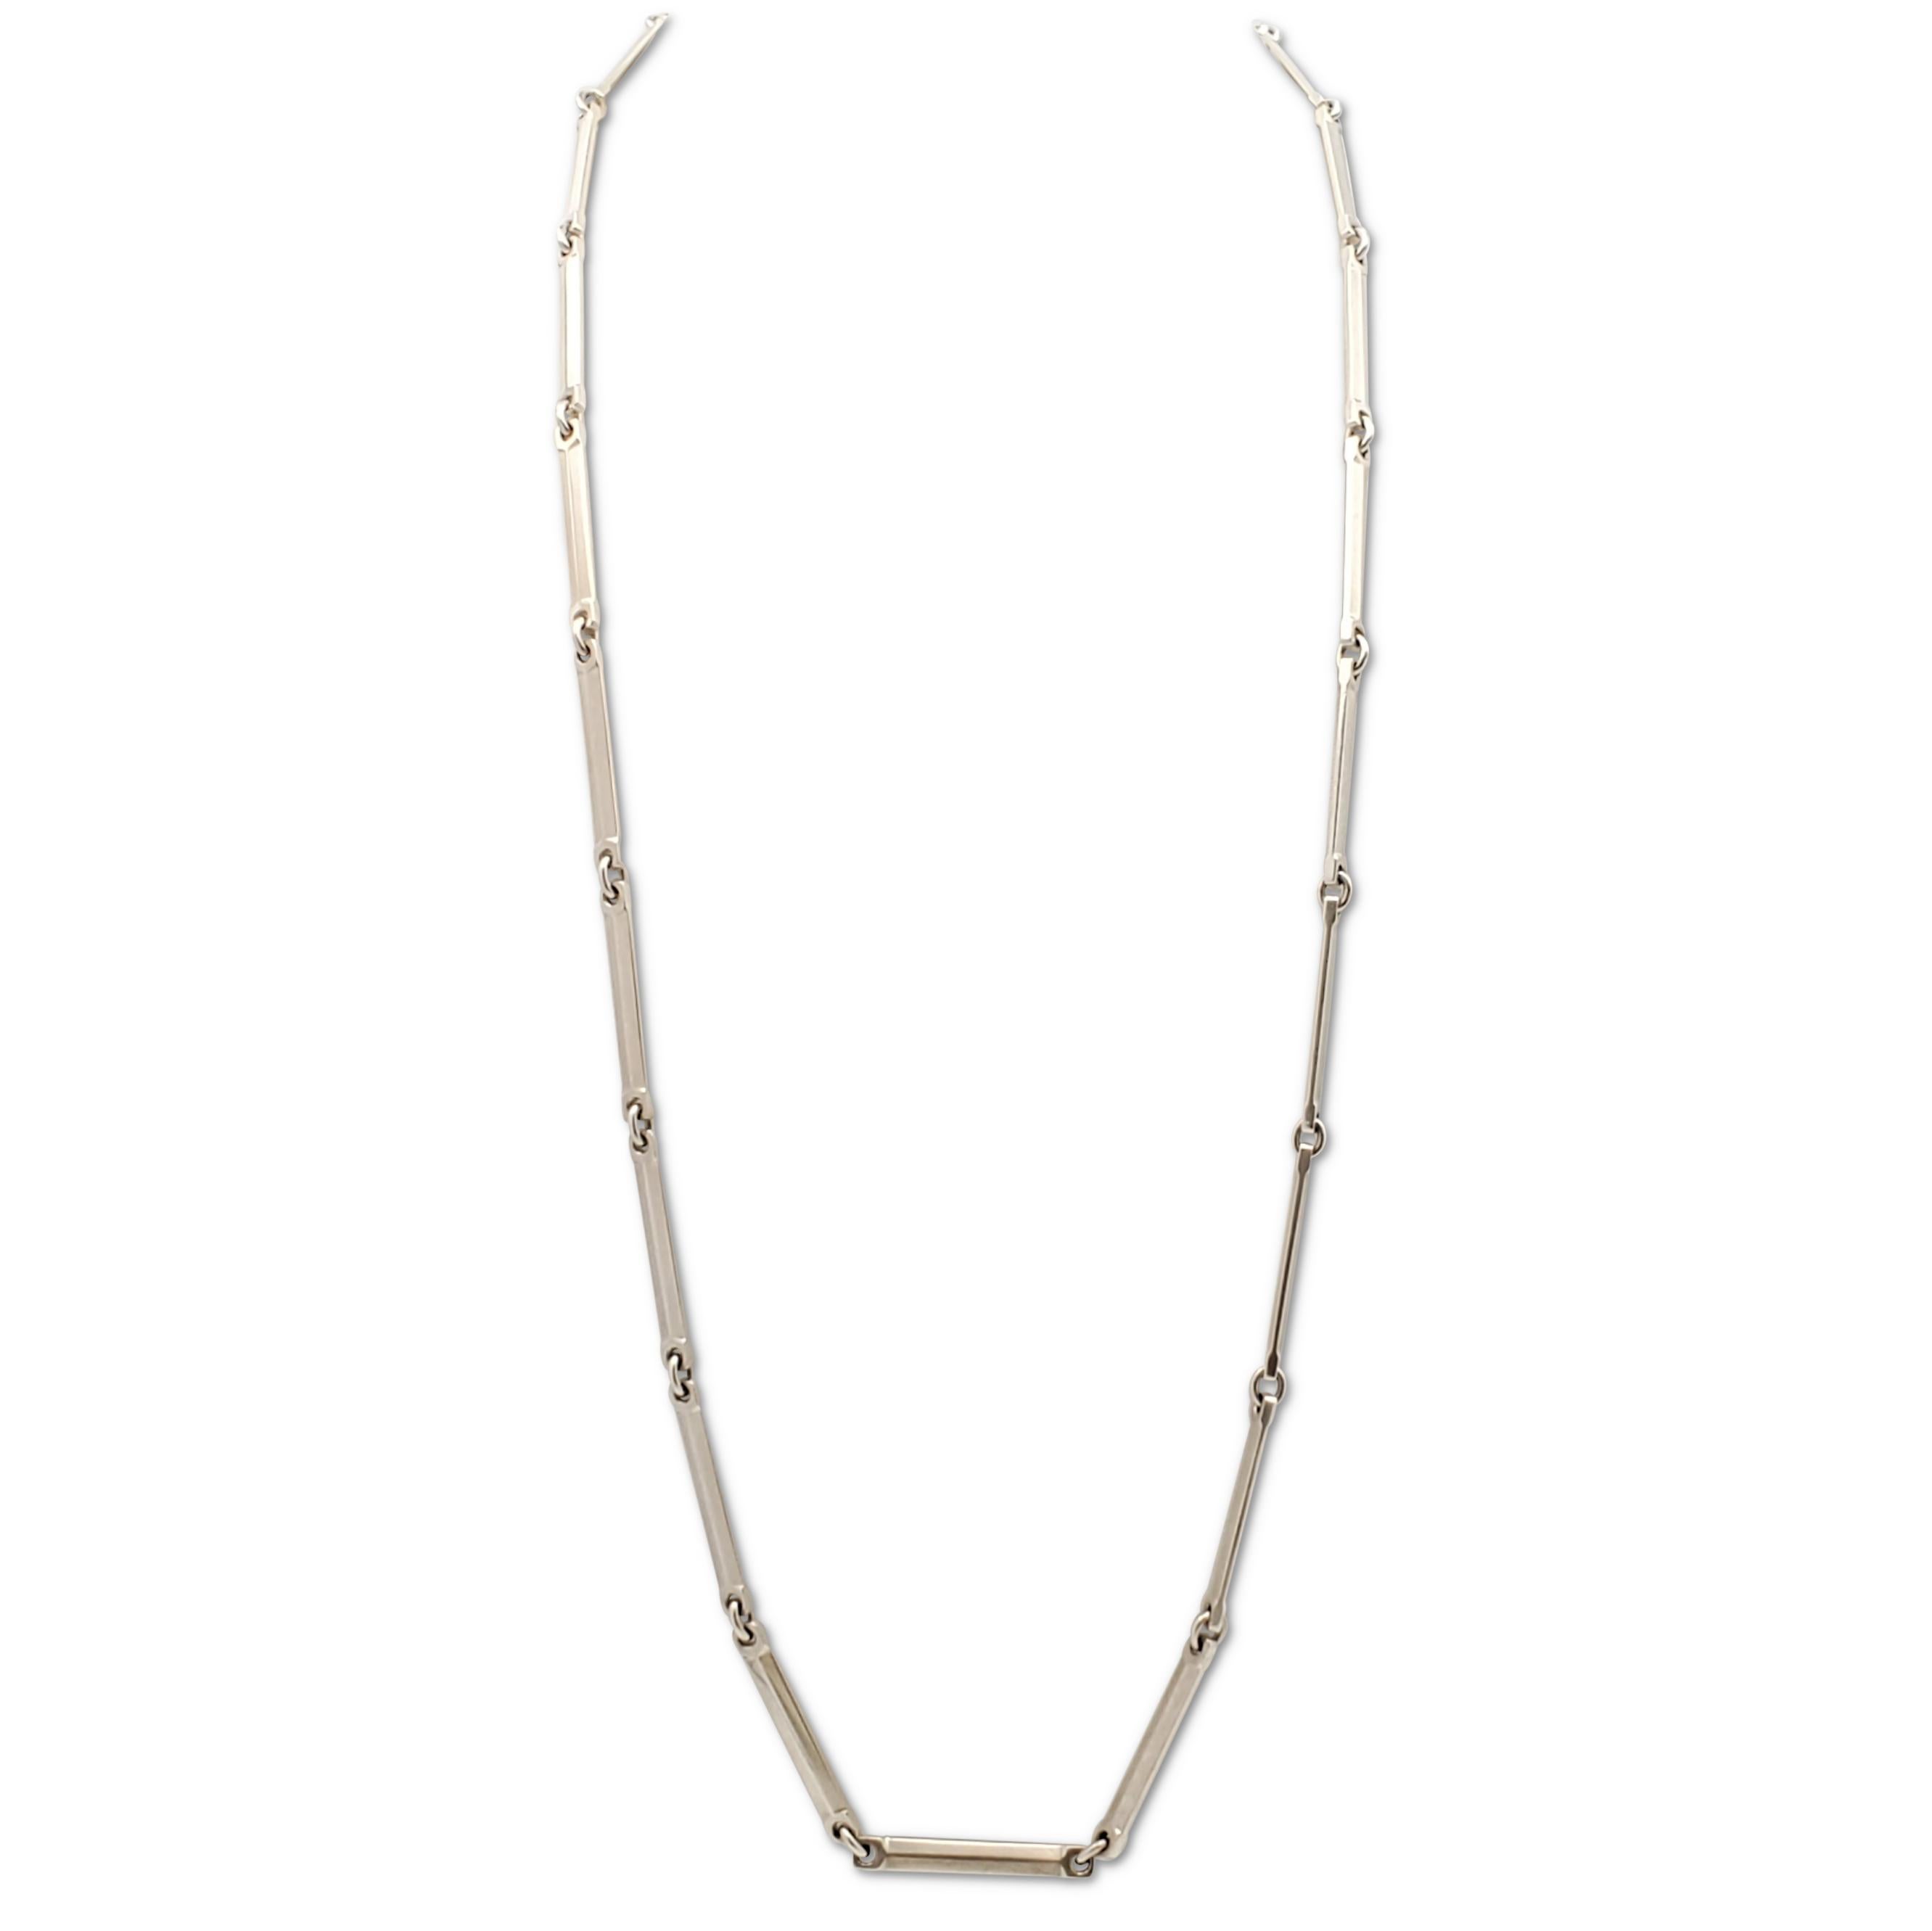 Authentic Mid-Century Hans Hansen necklace crafted in sterling silver is comprised of sleek bar-like links. Signed HaH, 925S, Denmark. The necklace measures 36 inches in length. Not presented with the original box or papers. CIRCA 1960s.

Necklace